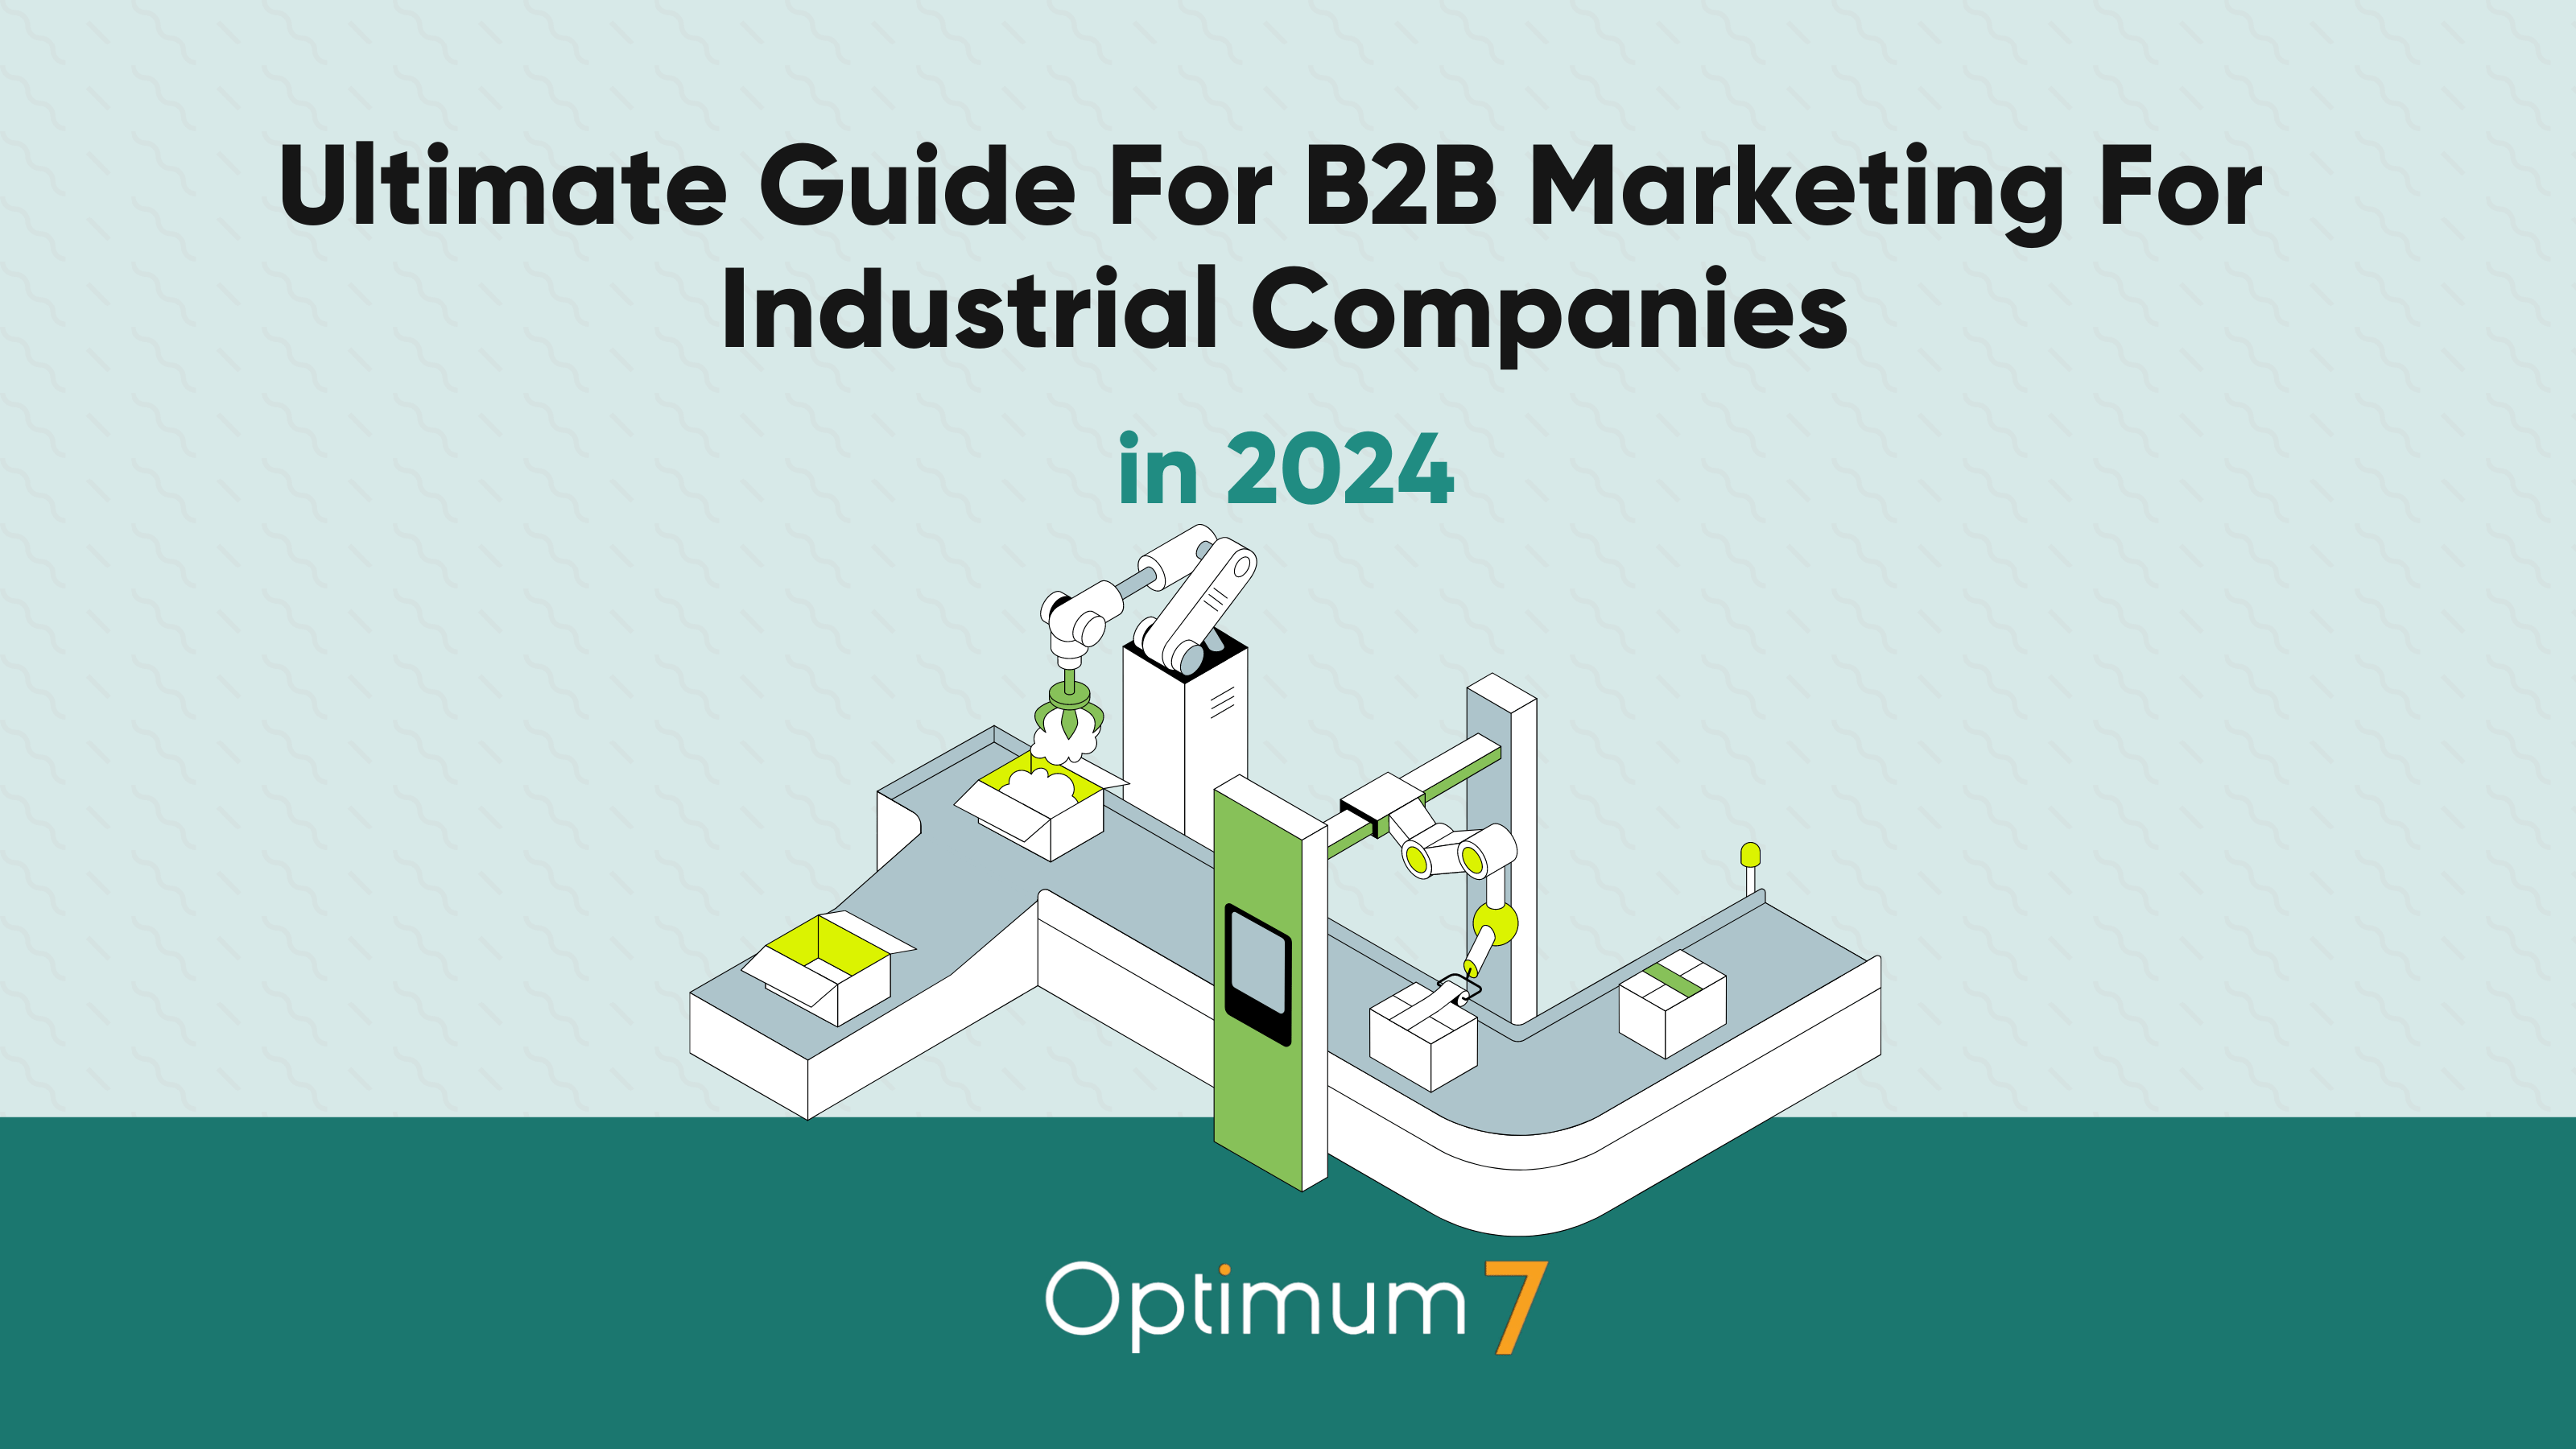 Ultimate Guide For B2B Marketing For Industrial Companies in 2024